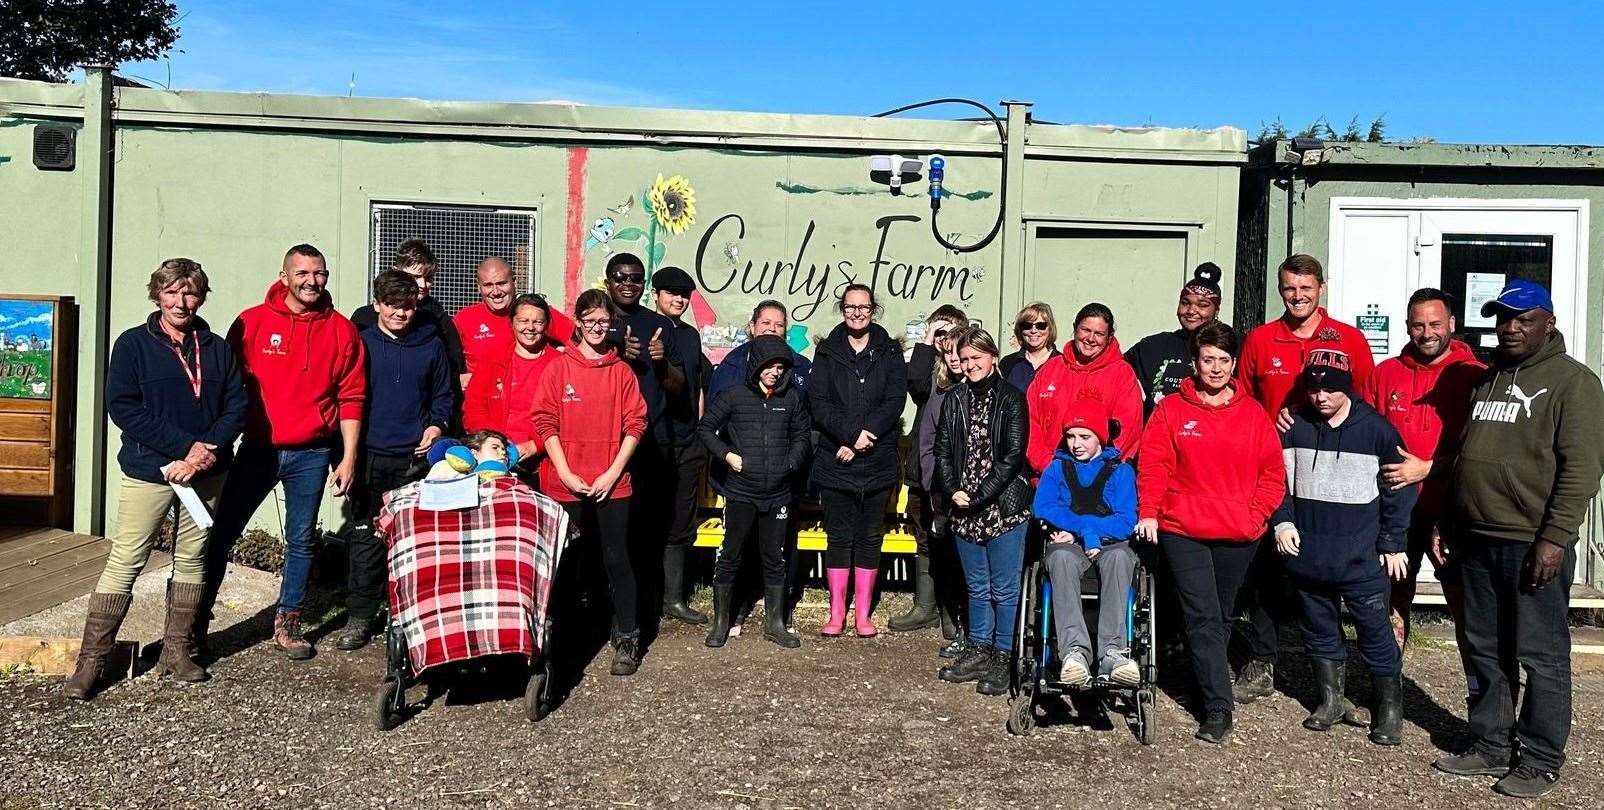 Sheppey's first Young Farmers' Group has been formed at Curly's Farm